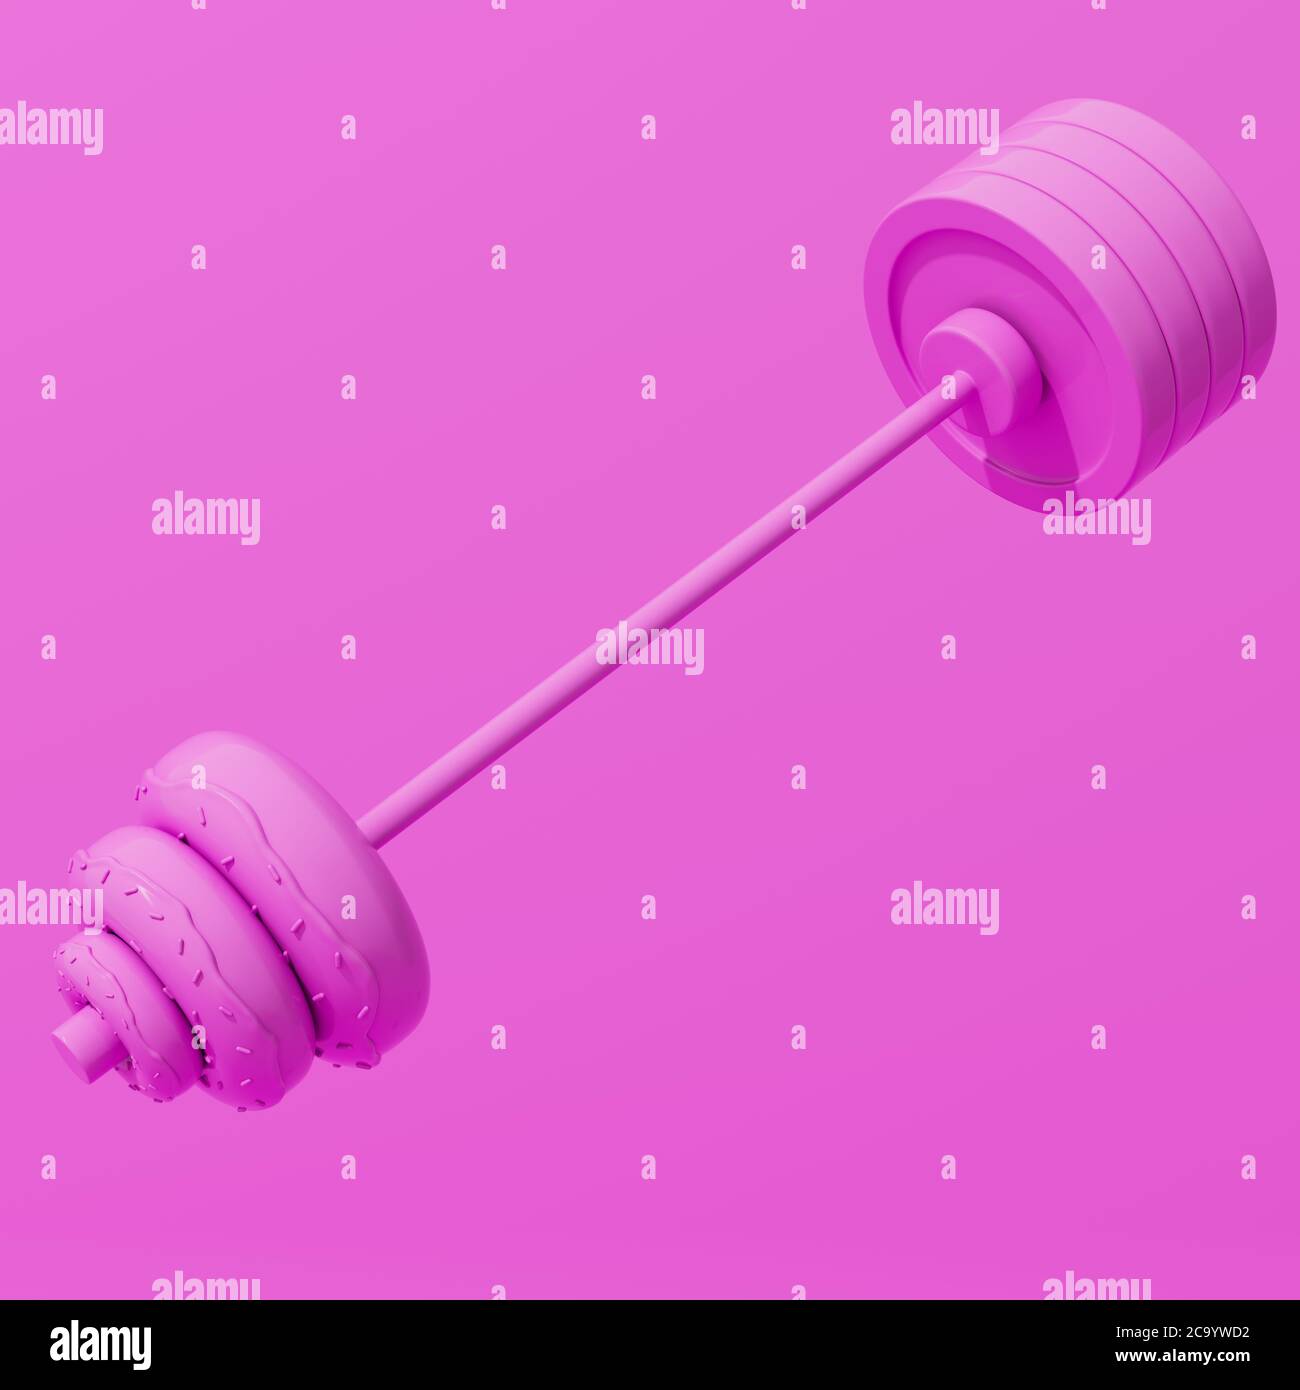 Stylized gym barbell made of half donuts and half weight plates on a pink background. Weight and fat loss. Dieting, sugar craving, additction Stock Photo